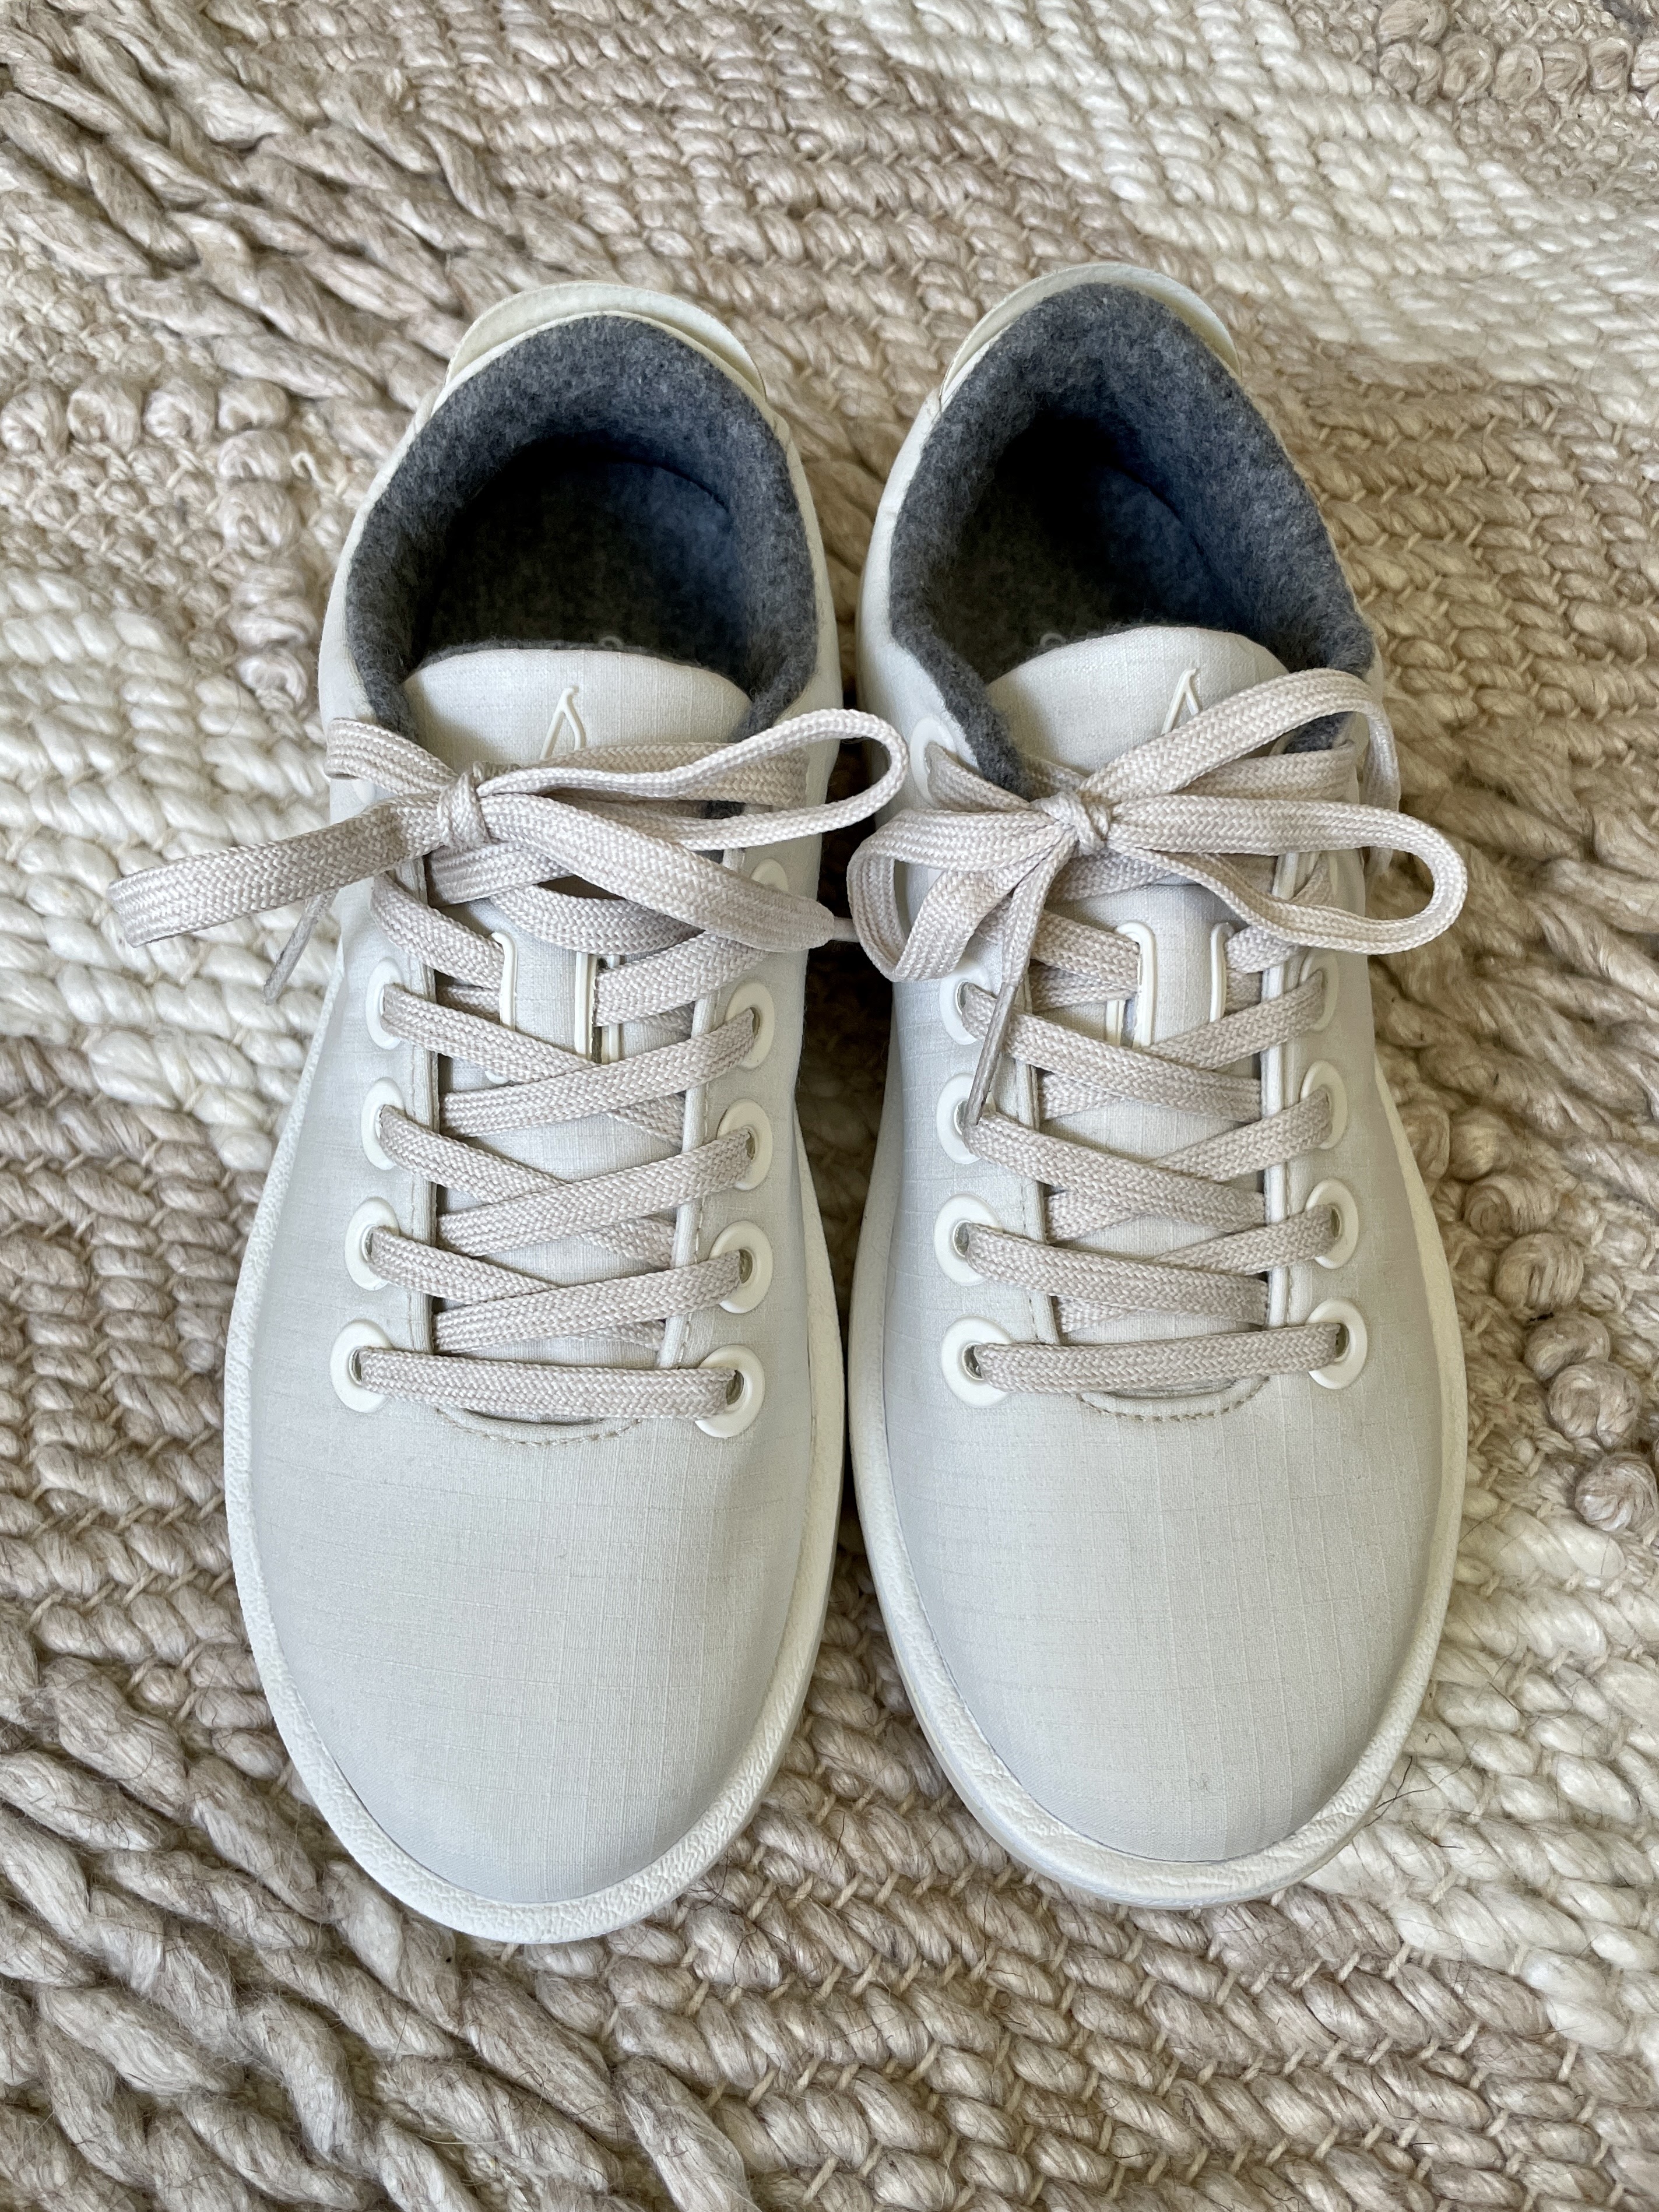 Fit Review Friday! Allbirds Wool Piper Woven Natural White